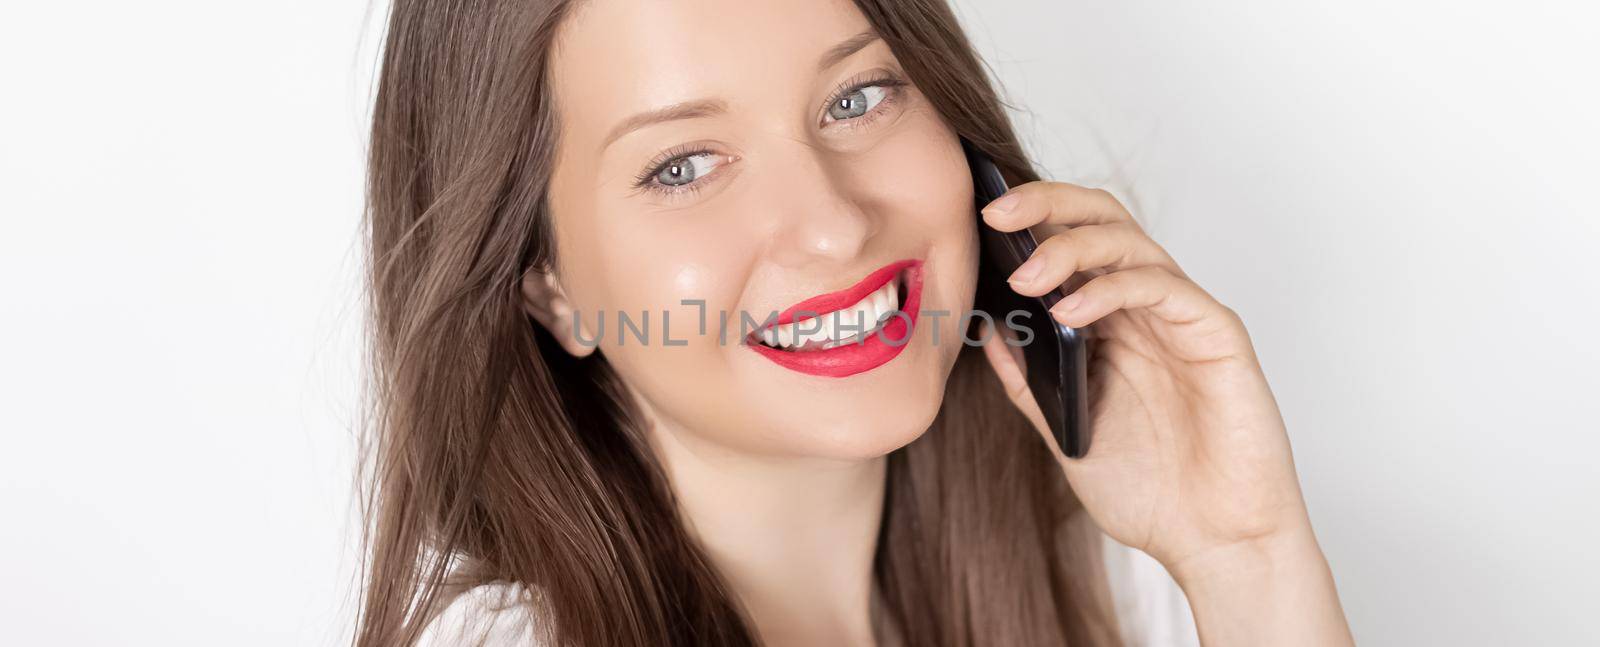 Happy smiling woman calling on smartphone, portrait on white background. People, technology and communication concept.